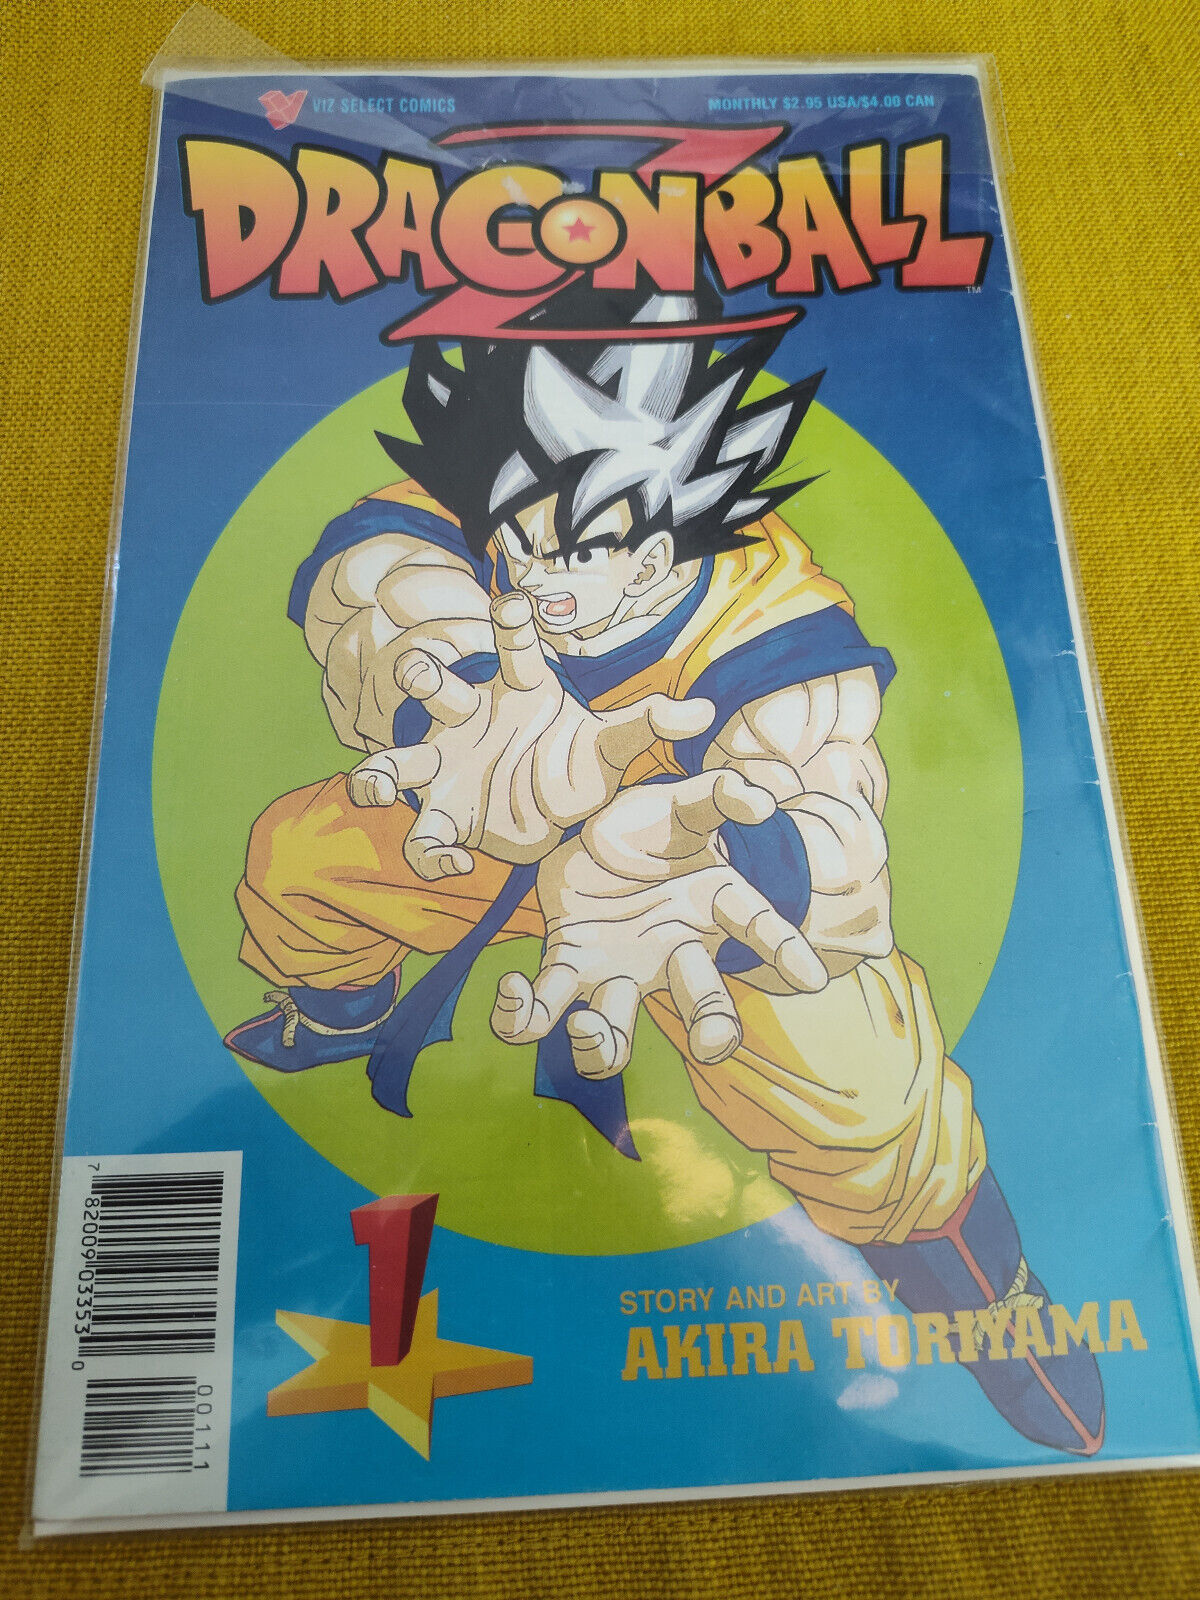 Used Acceptable Condition Viz Select Comics Dragon Ball Z Issue 1 Retail Version